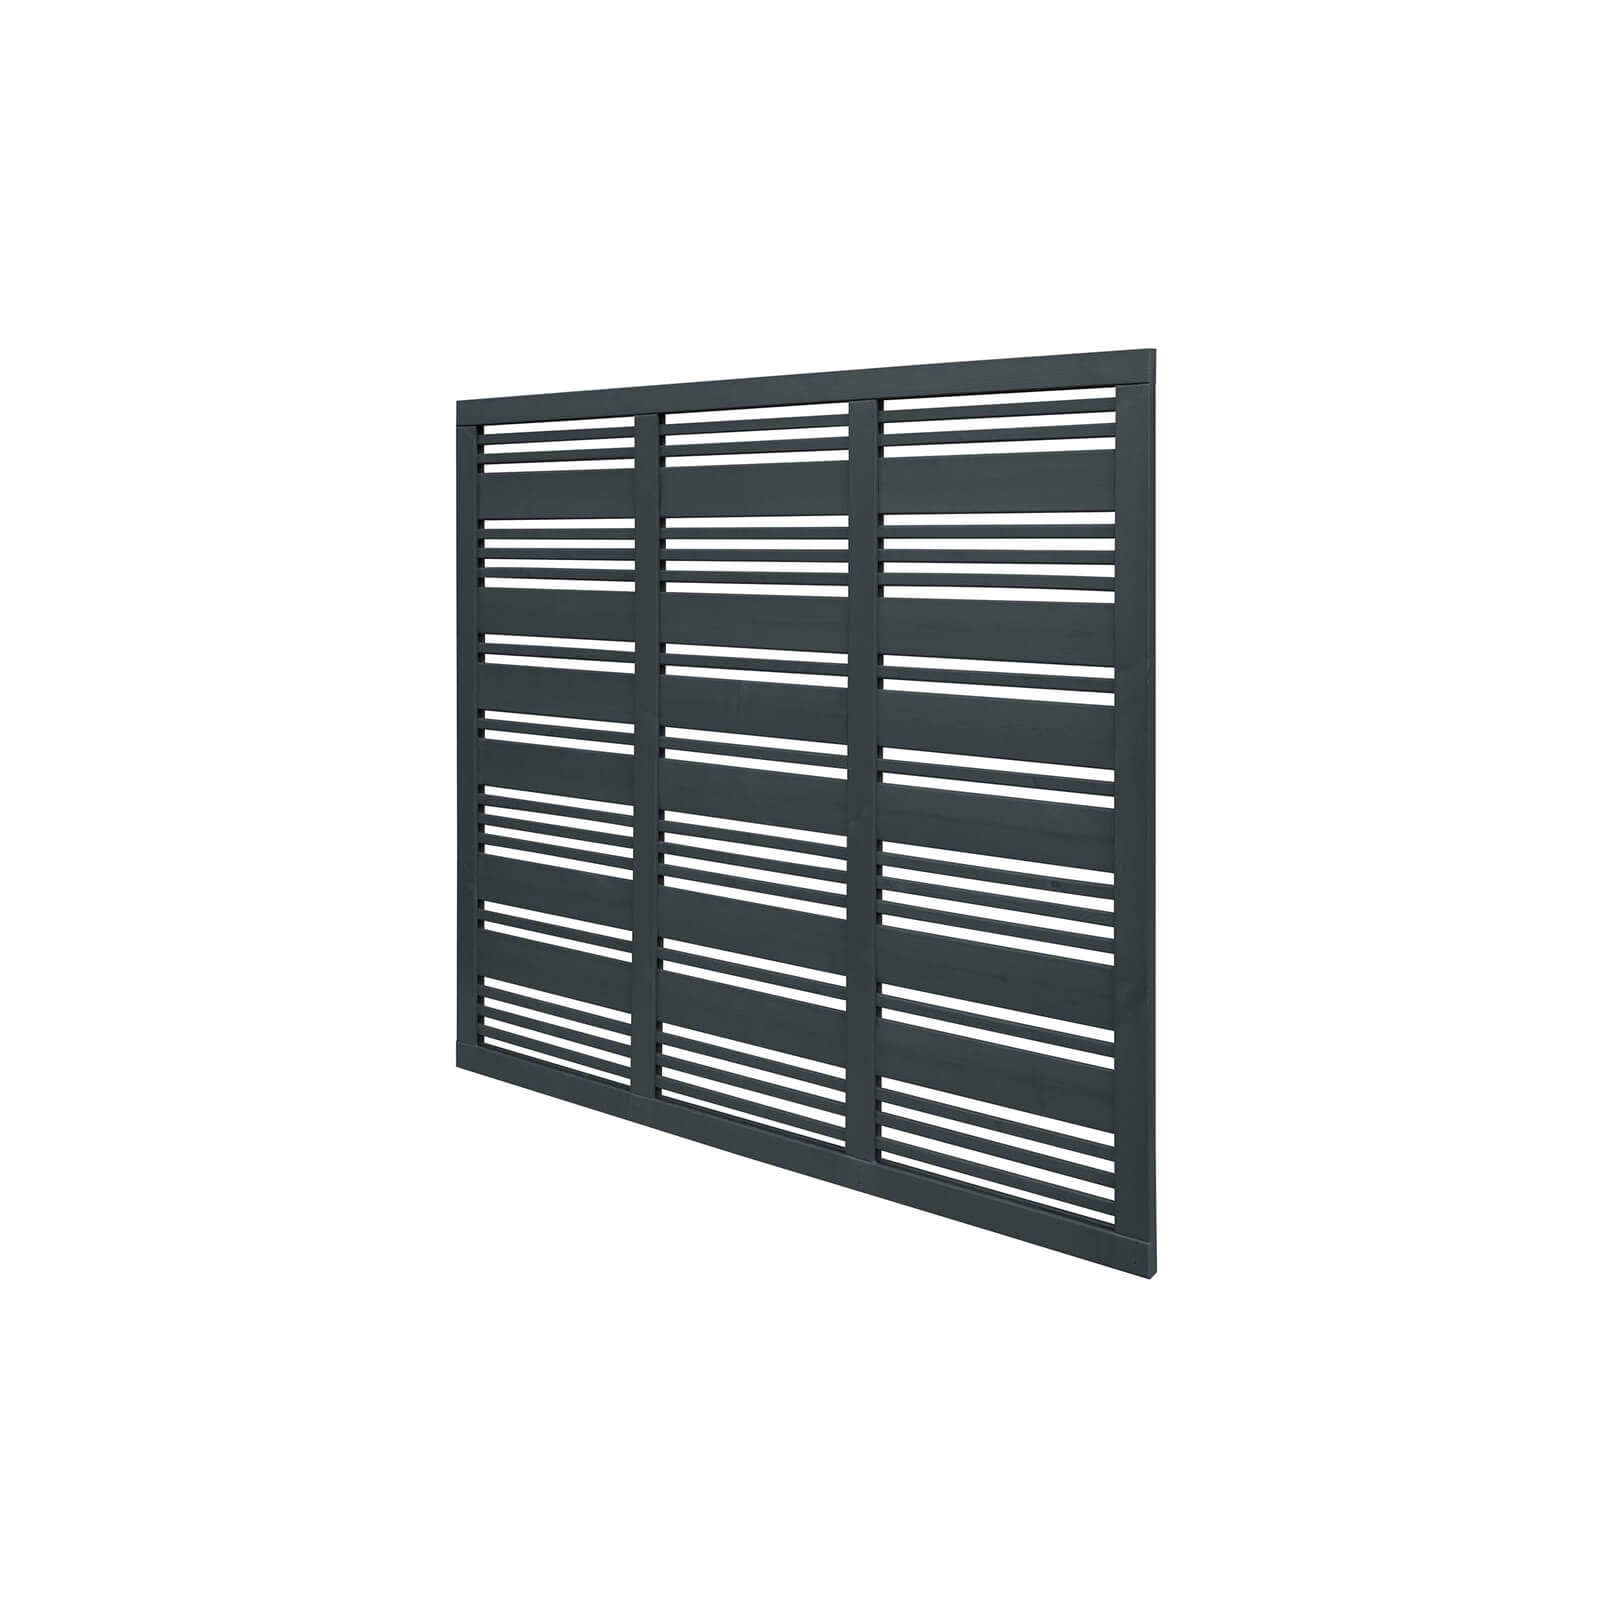 6ft x 6ft (1.8m x 1.8m) Grey Painted Contemporary Mix Slatted Fence Panel - Pack of 5